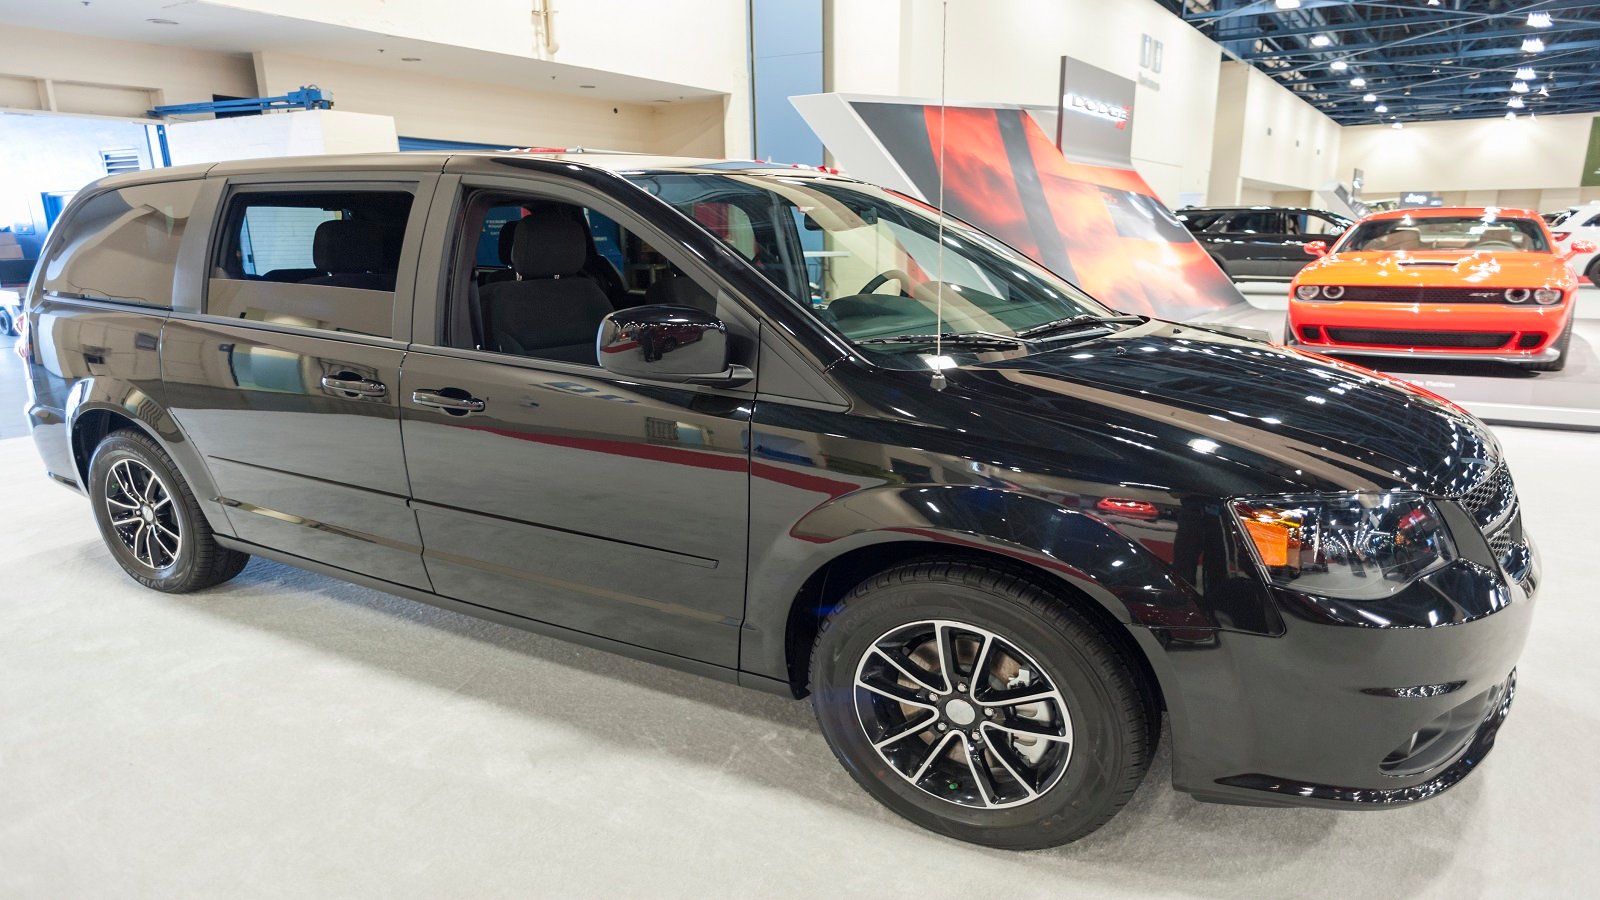 <p>The Dodge Caravan, a popular minivan, should be added to the list of cars to avoid in 2024 due to a few significant concerns. Below are the top four reasons:</p><ul> <li><strong>Fuel Efficiency</strong>: The Caravan has been known for its low fuel efficiency, which means that owners may end up spending more on gasoline compared to more fuel-efficient vehicles.</li> <li><strong>Safety Ratings</strong>: The Caravan has received <a href="https://www.example.com/safety-ratings" rel="noopener">subpar safety ratings</a> from major organizations, which raises concerns about the overall security of the vehicle and its passengers.</li> <li><strong>Outdated Design</strong>: With newer, more innovative vehicles on the market, the Caravan seems to have a dated design, making it less attractive to potential buyers.</li> <li><strong>Competitors</strong>: The Caravan faces stiff competition from other minivans offering more up-to-date features, better performance, and improved design.</li> </ul>